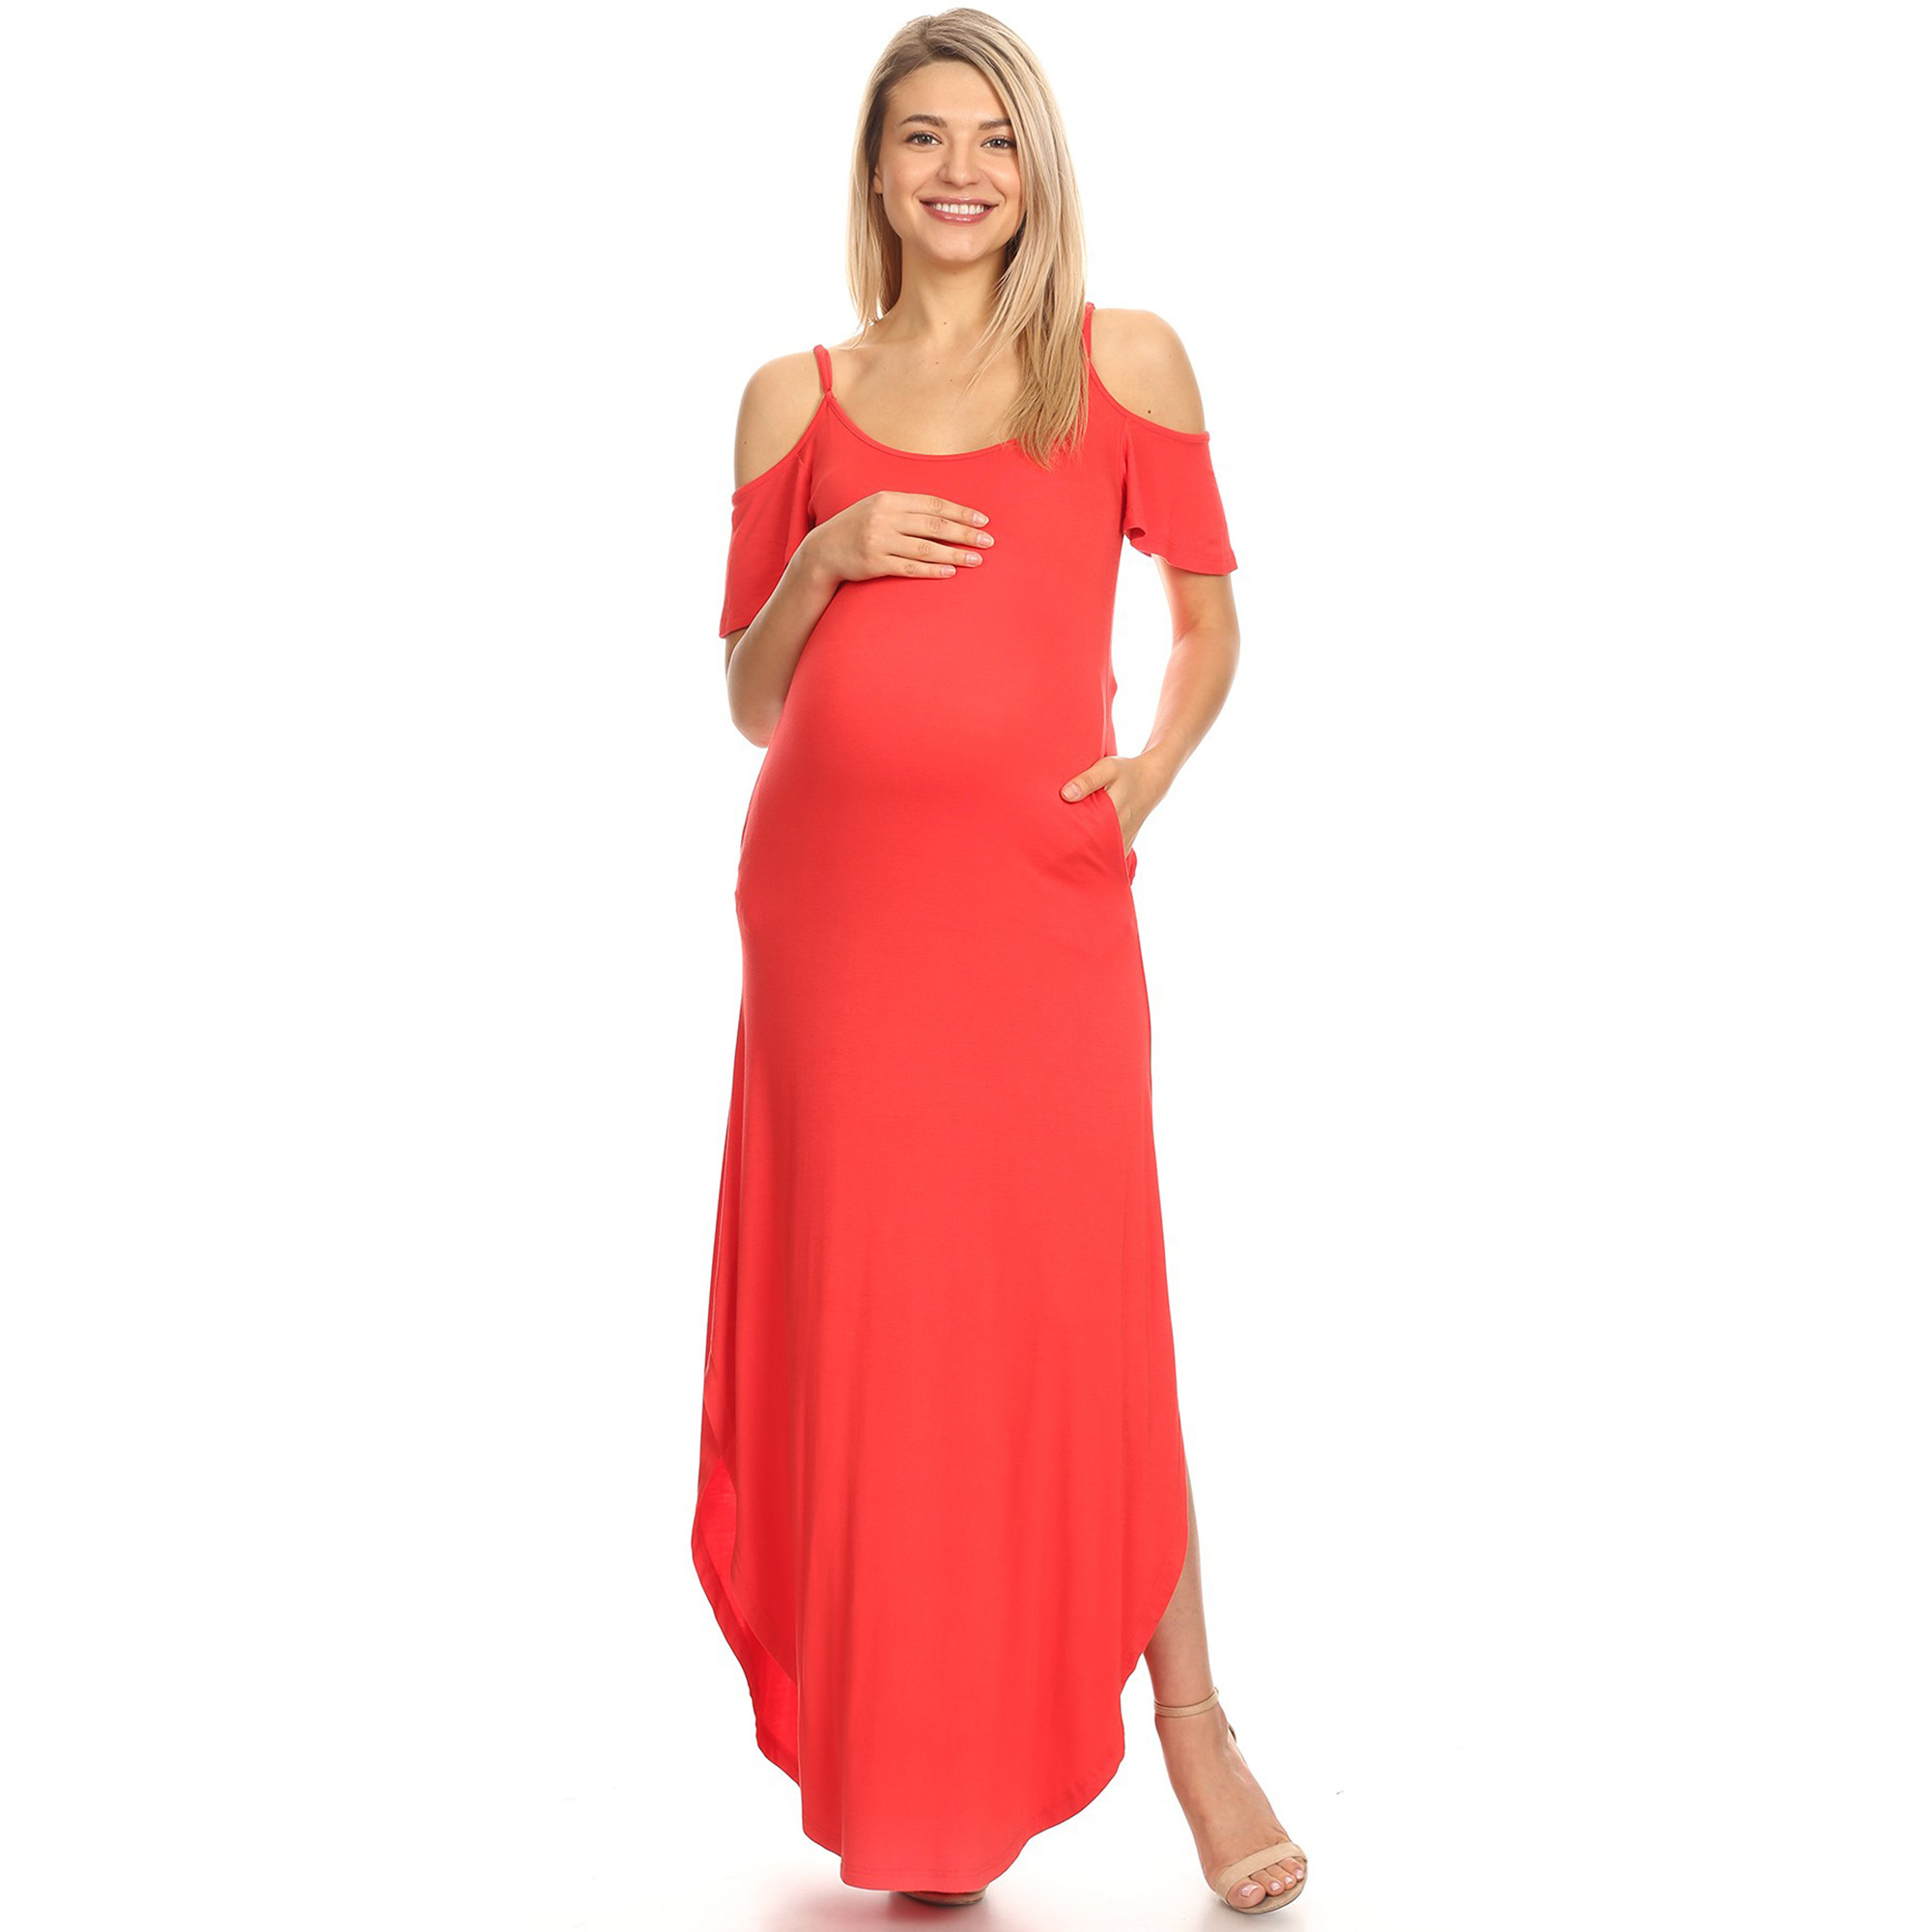 White Mark Women's Maternity Cold Shoulder Maxi Dress - Red, 2X